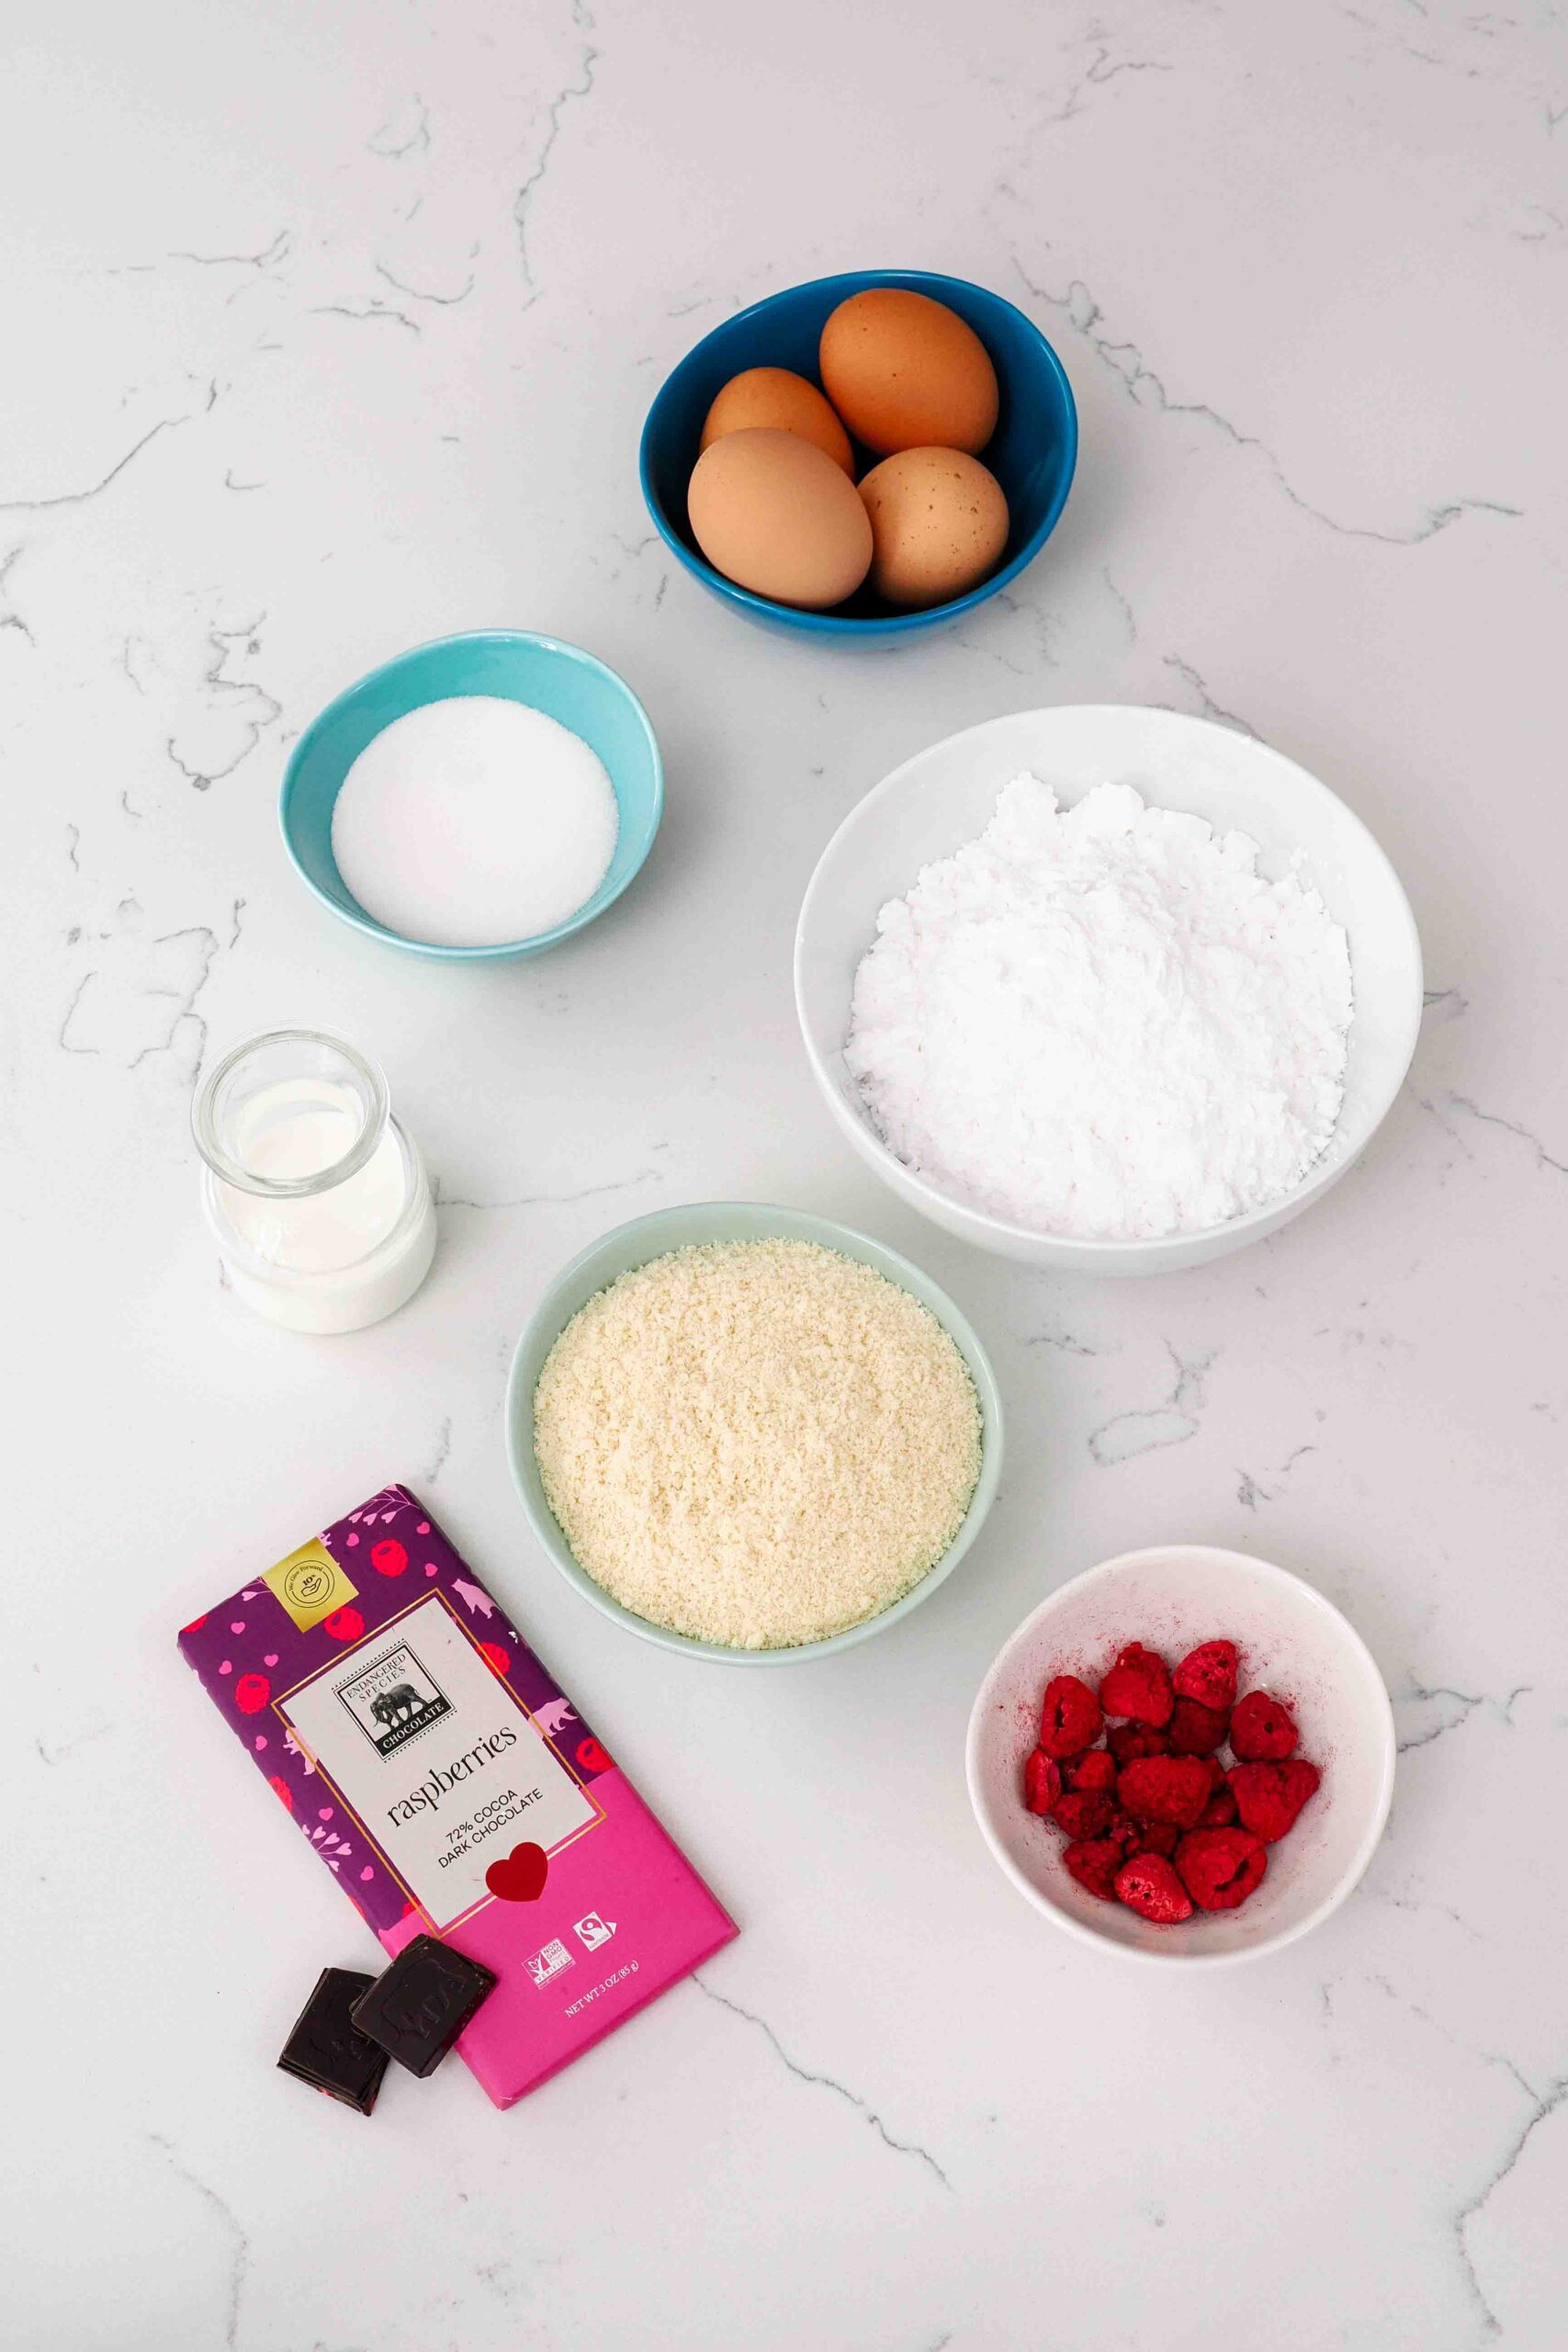 Ingredients for chocolate raspberry macarons on a quartz countertop.